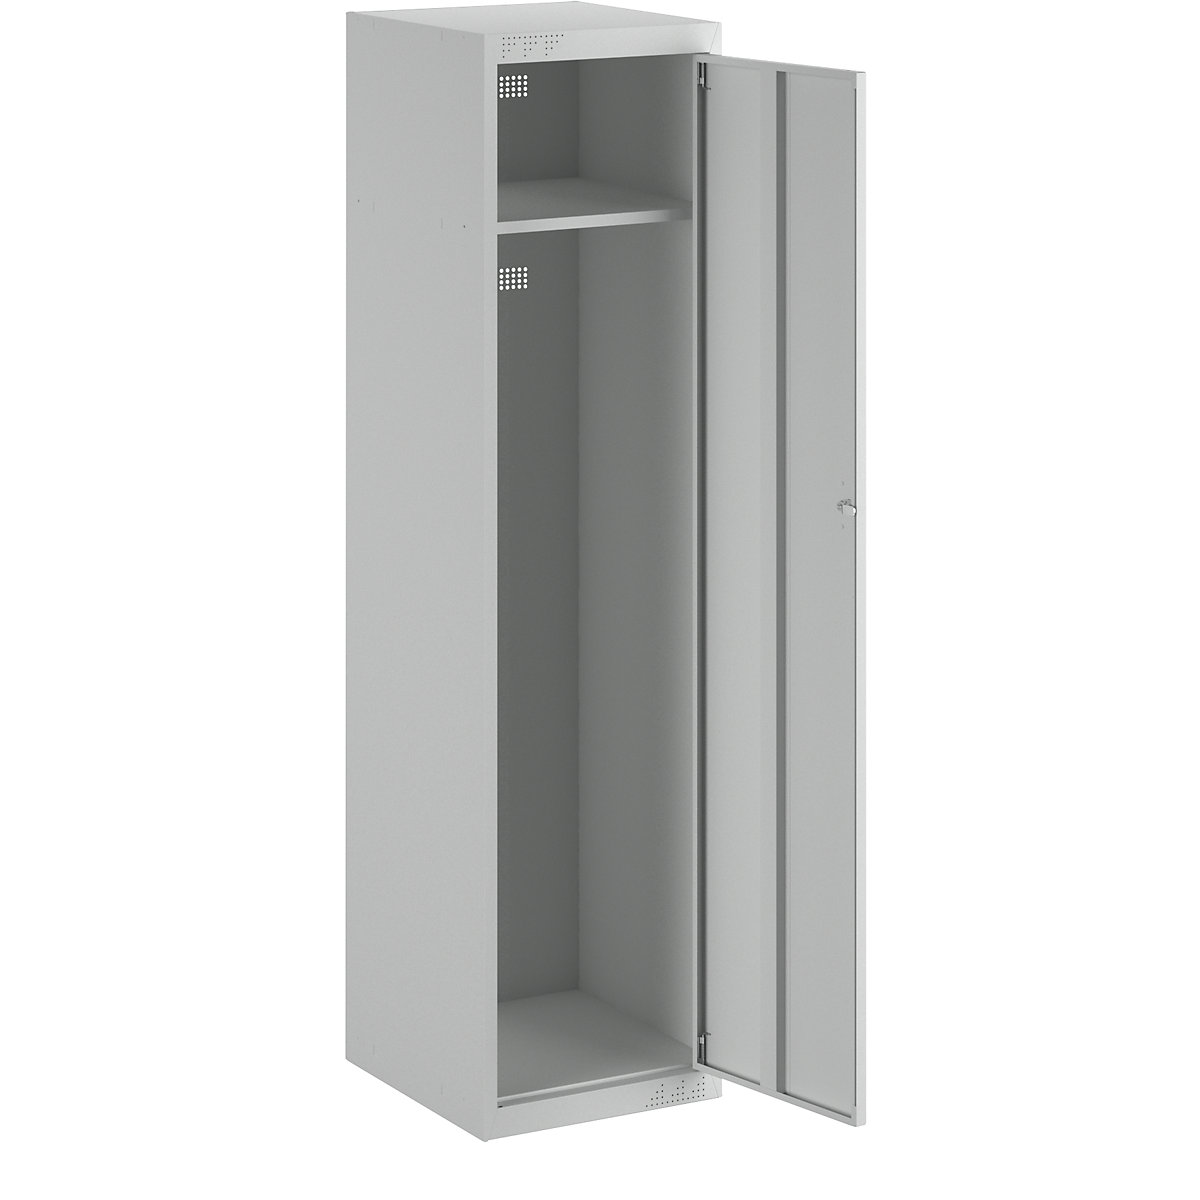 Cloakroom locker system – eurokraft basic, with standard and extension modules, HxWxD 1800 x 450 x 500 mm, 1 hat shelf, 1 clothes rail, light grey, extension unit-11